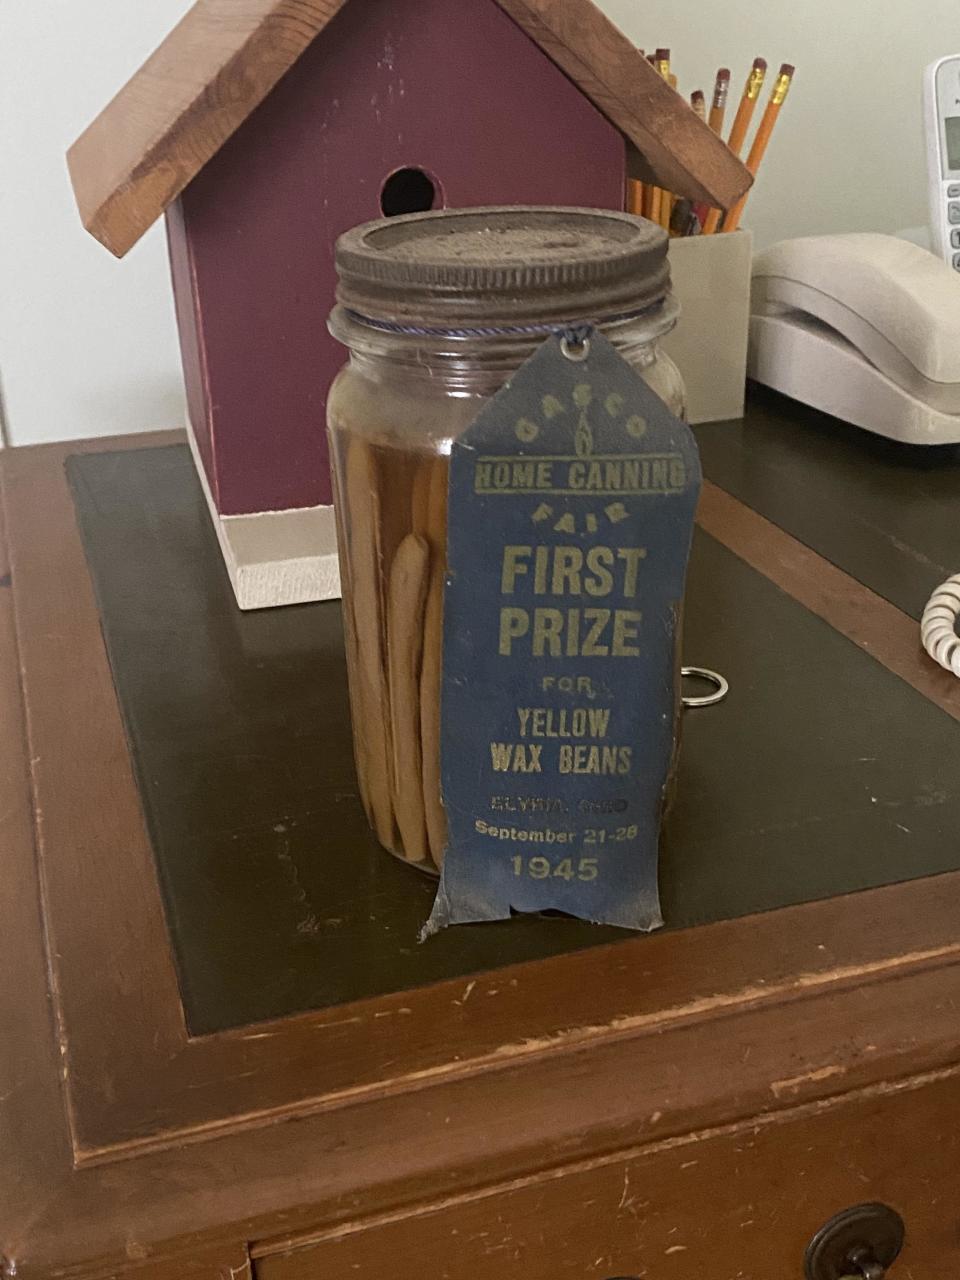 Jar of yellow wax beans with a 'First Prize' ribbon from a 1945 canning fair on a wooden surface